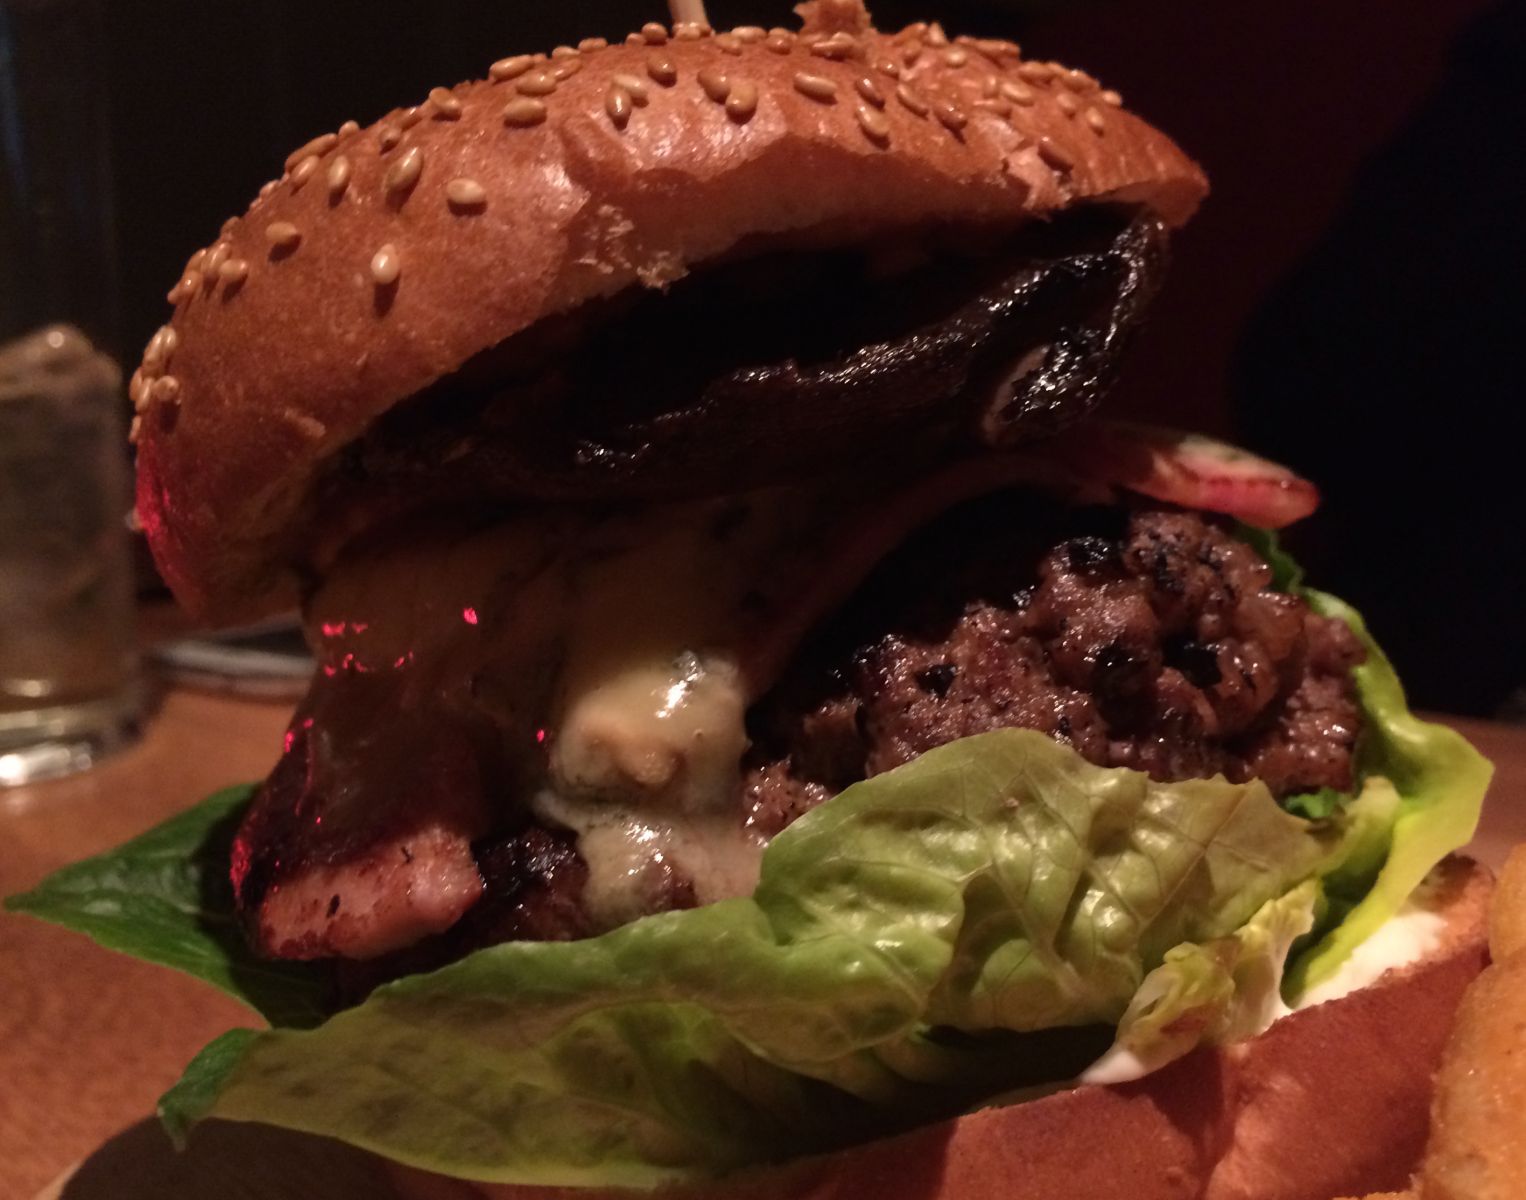 Check out the awesome burgers at Clifton Wine Bar in Bristol